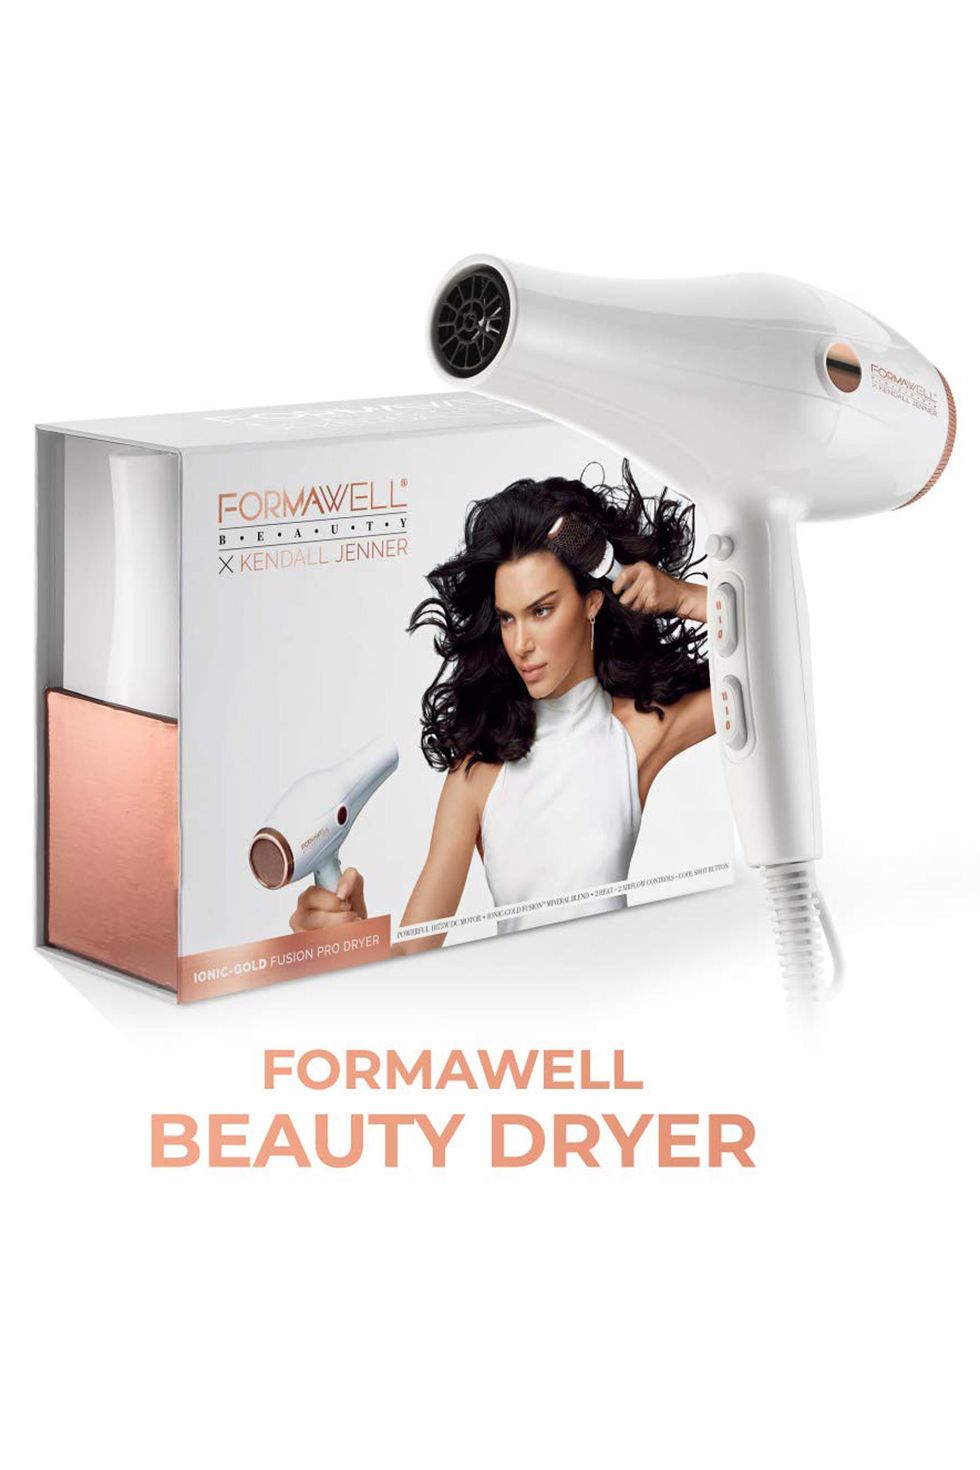 Formawell Beauty x Kendall Jenner Ionic Dryer